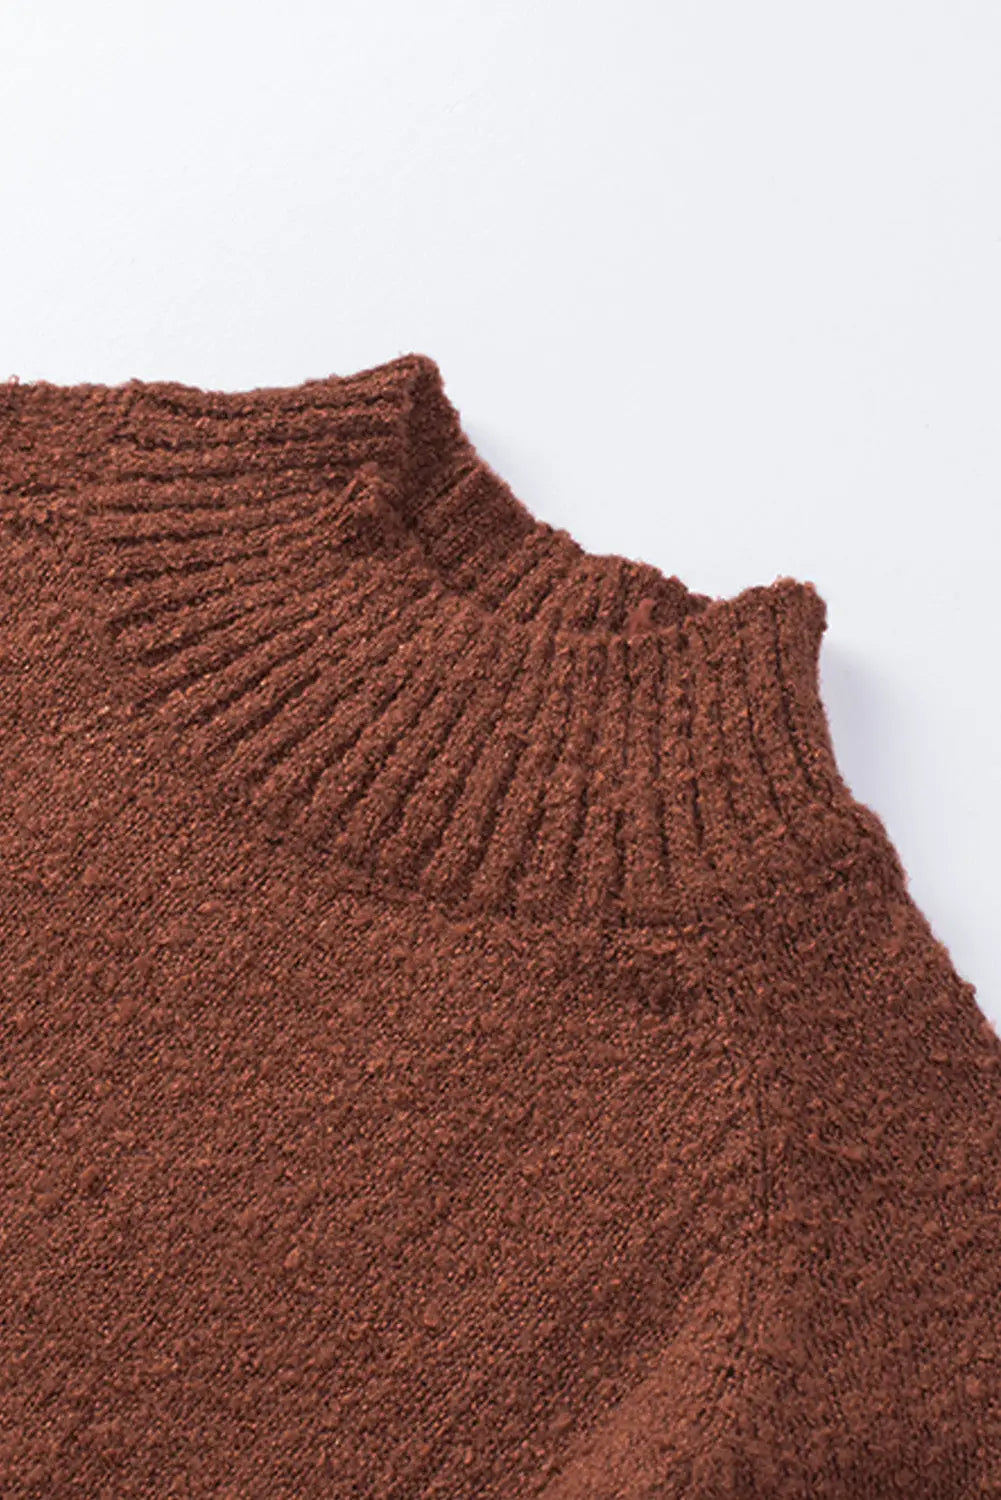 Brown solid color lantern sleeve knitted sweater - sweaters & cardigans